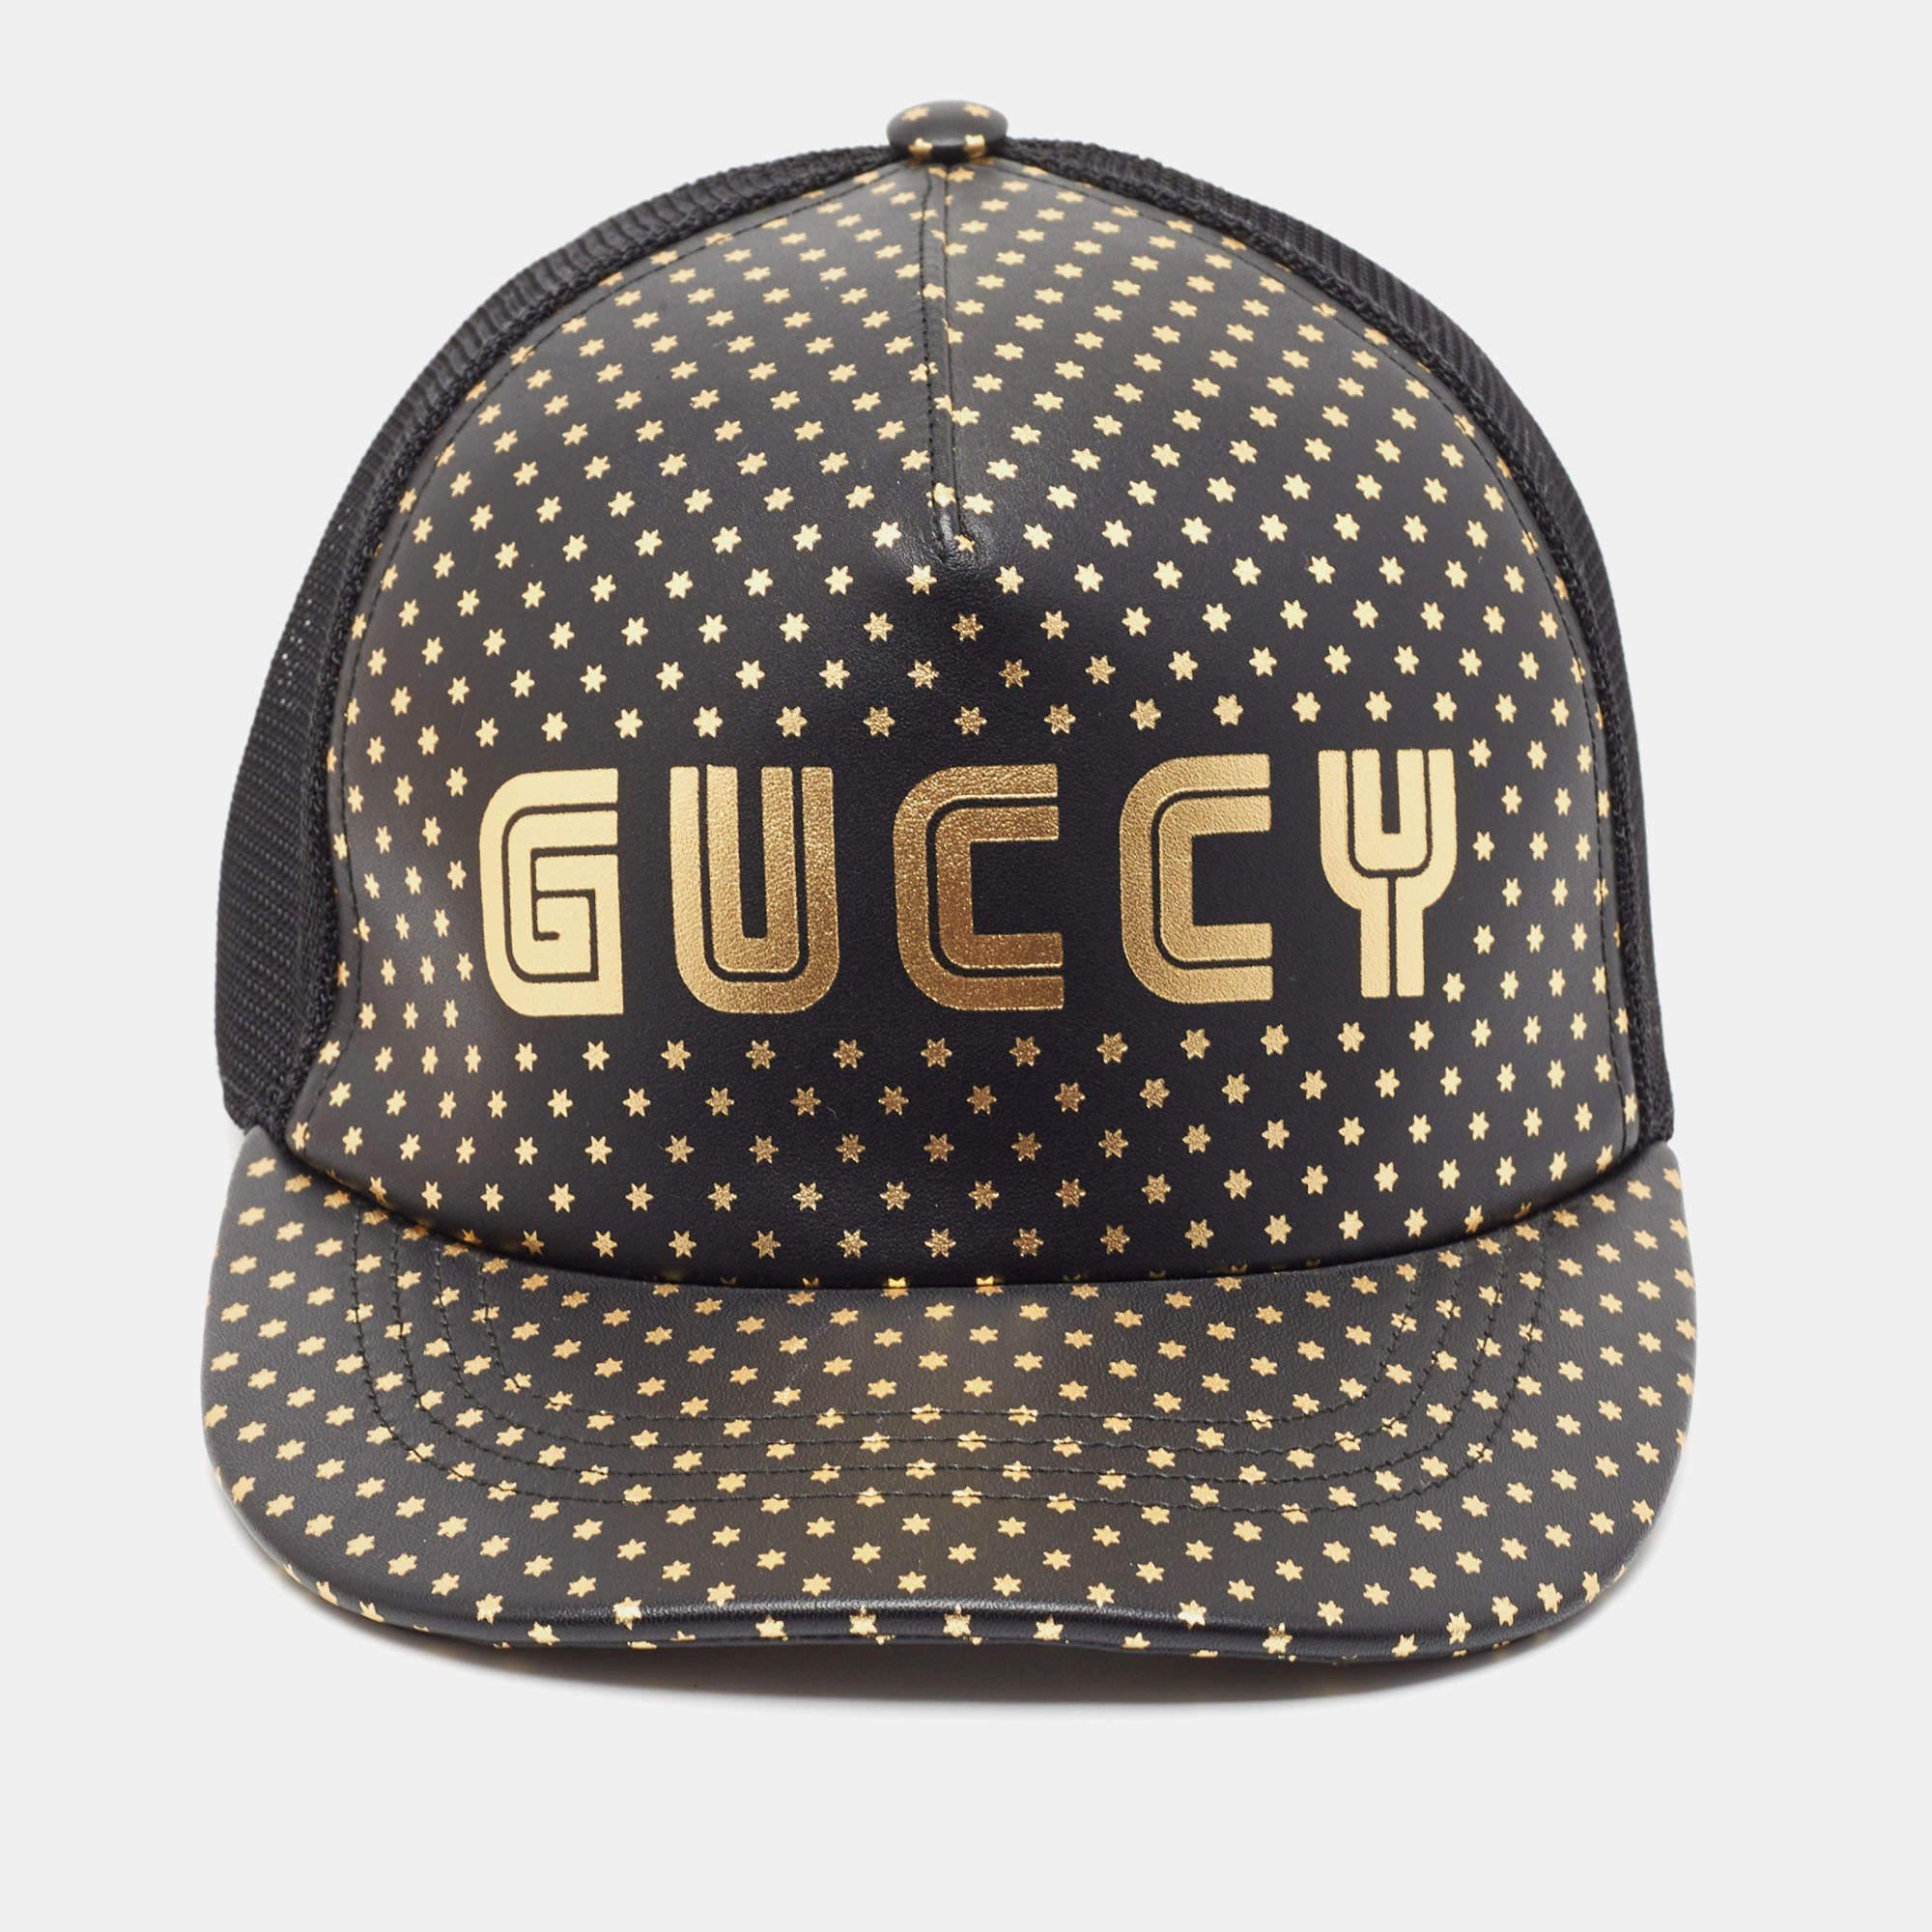 Caps are an ideal style statement with casual outfits. This Gucci piece is made from quality materials and features signature elements. This piece will be a smart addition to your cap collection.

Includes: Brand Tag